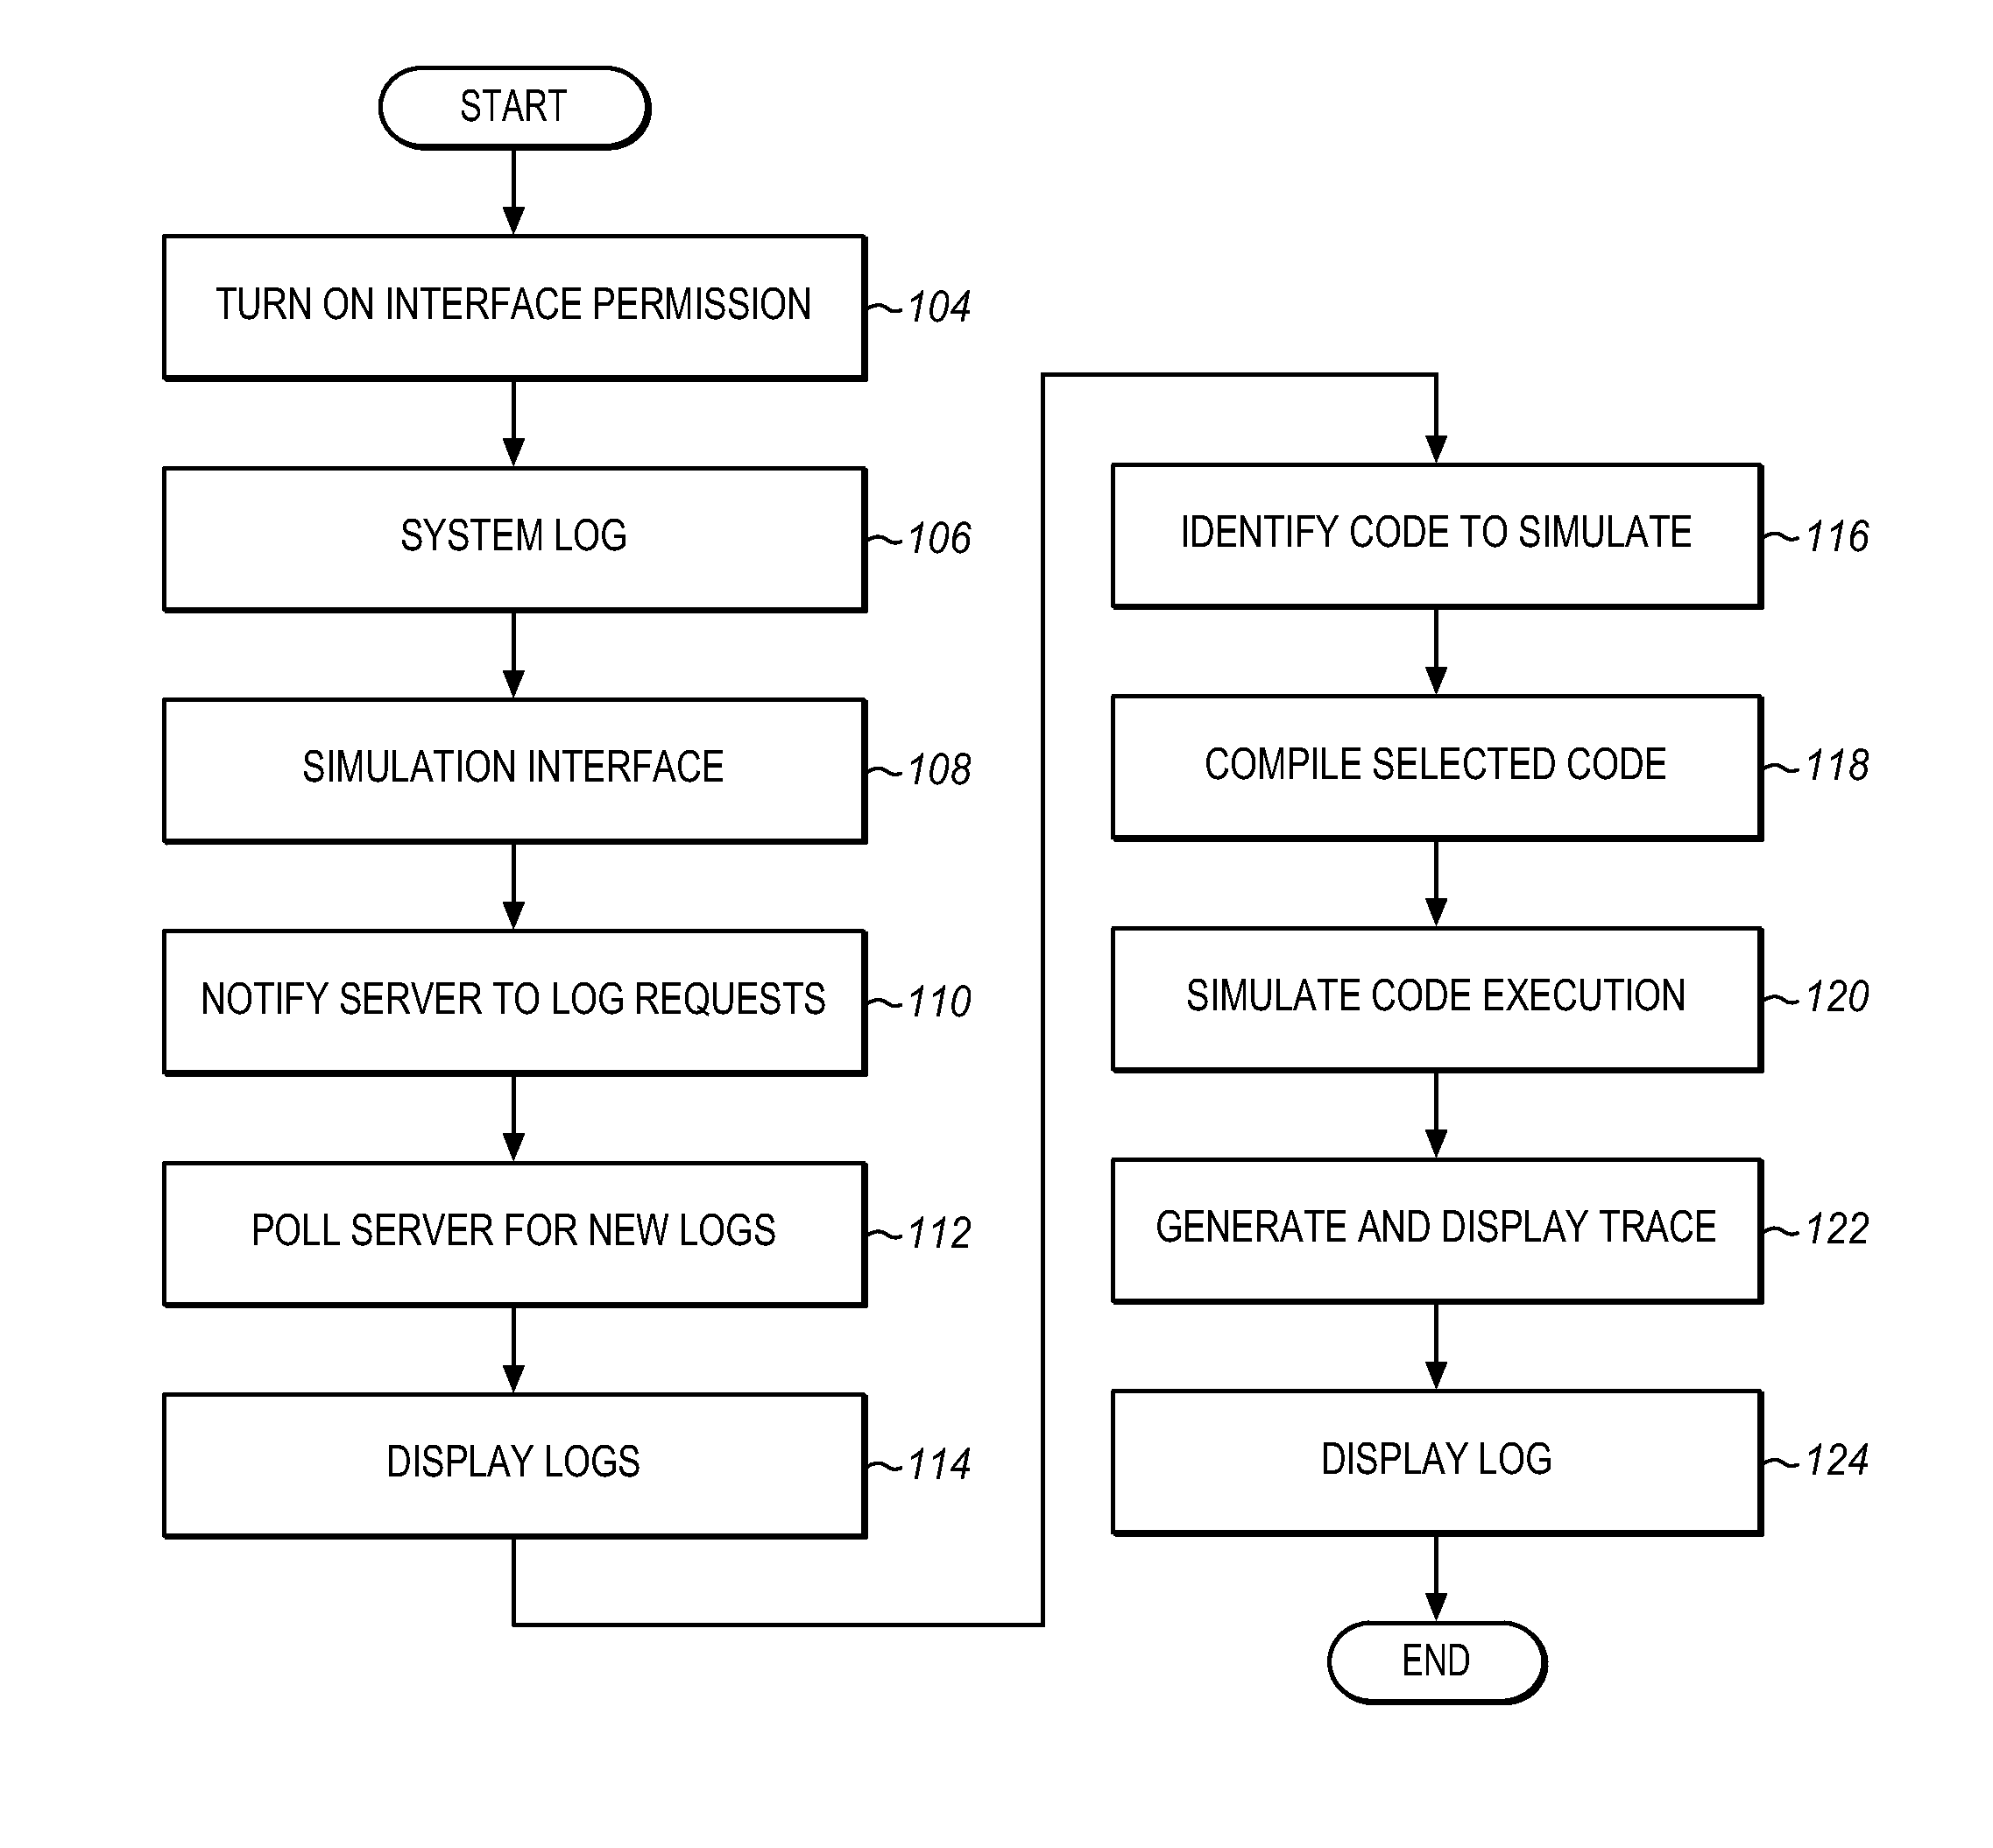 Method and system for simulating and analyzing code execution in an on-demand service environment